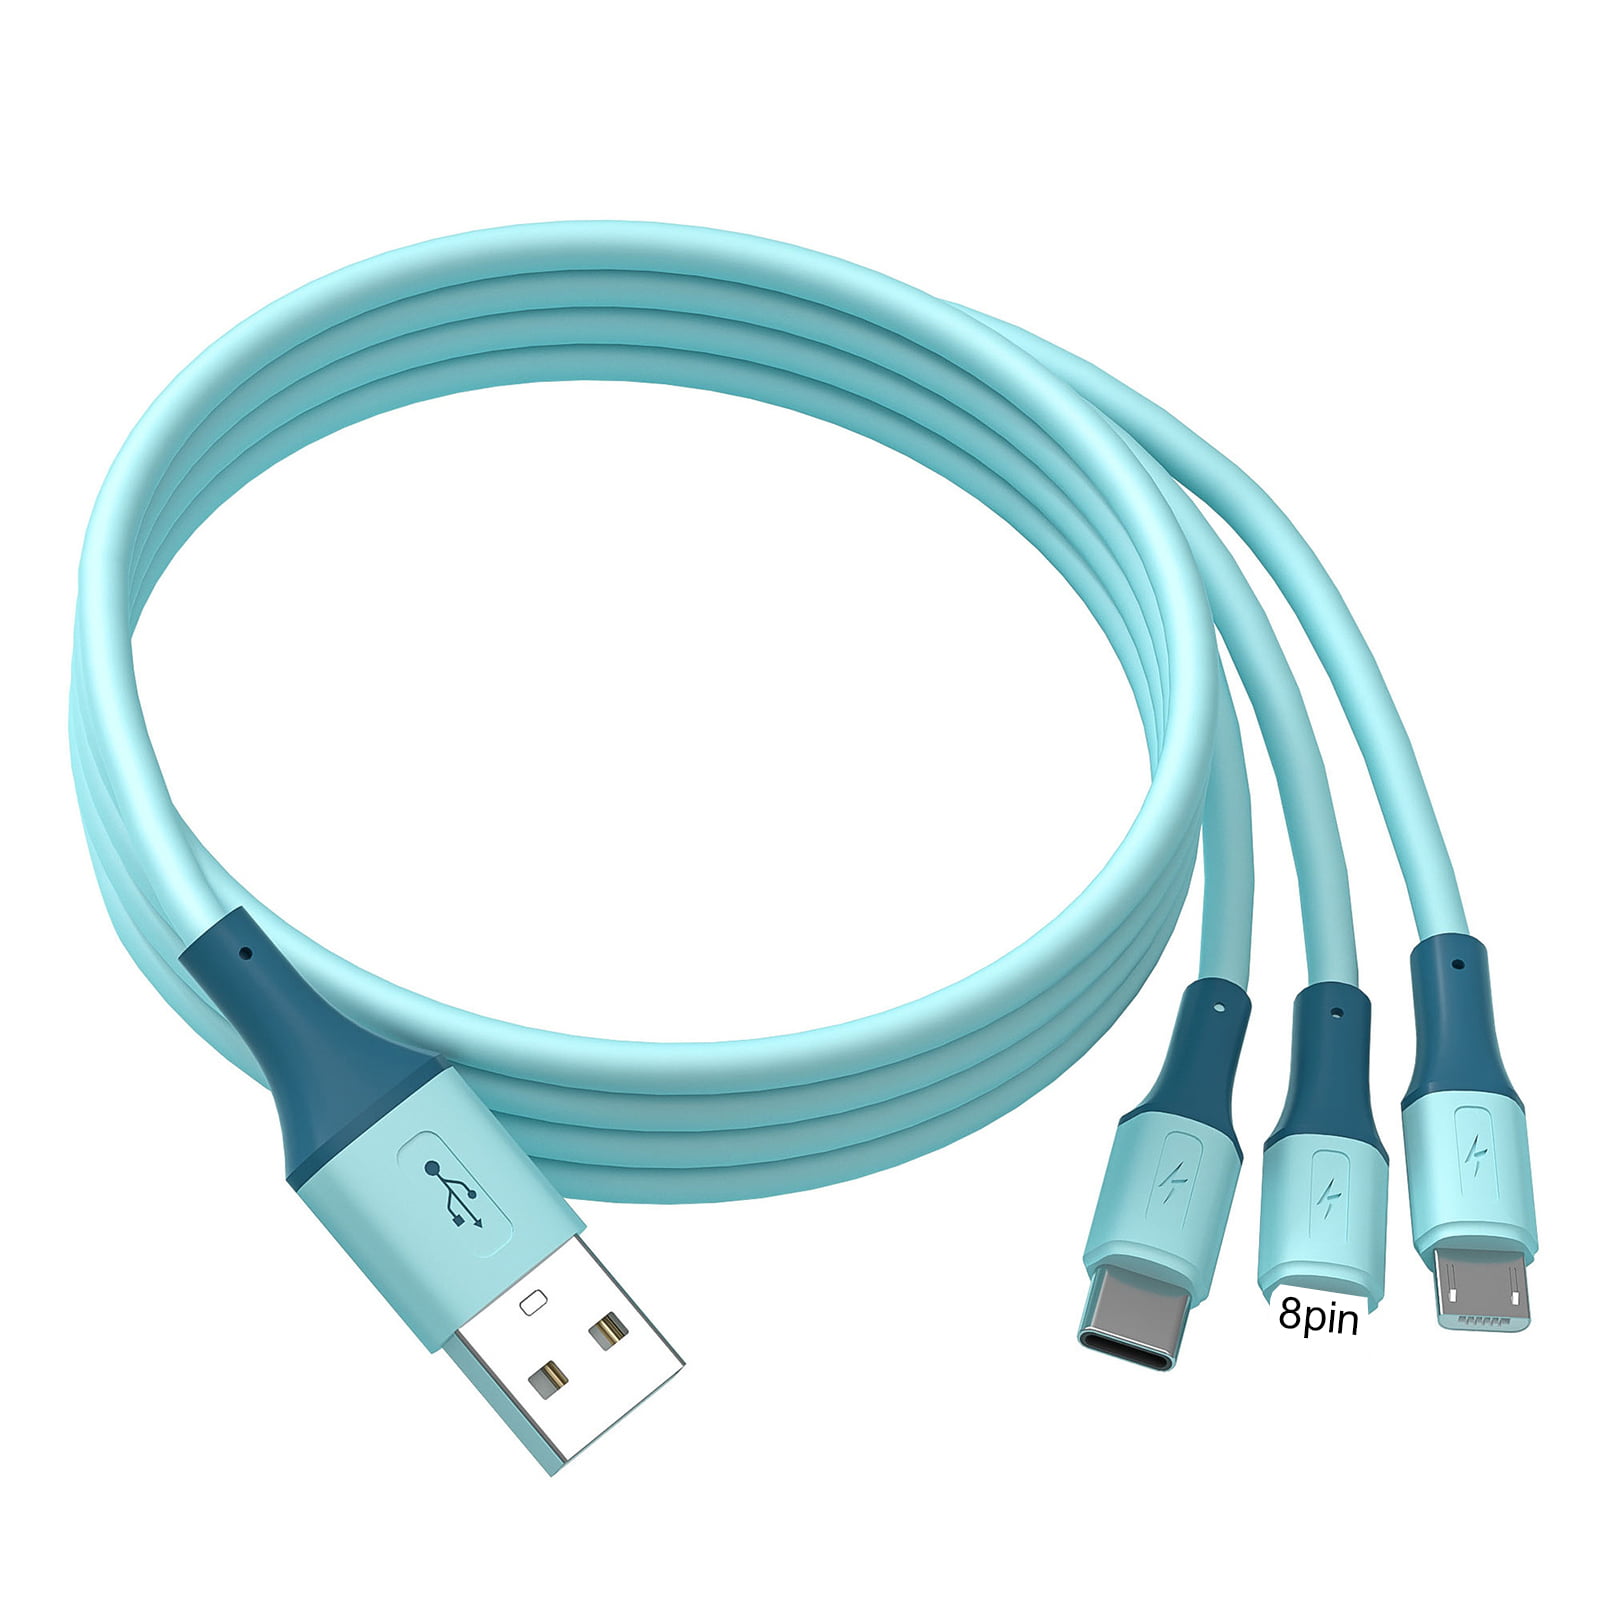 HI-PLUS Micro USB Cable 2 A 1 m USB DATA CABLE - 3in1 Multi-Pin